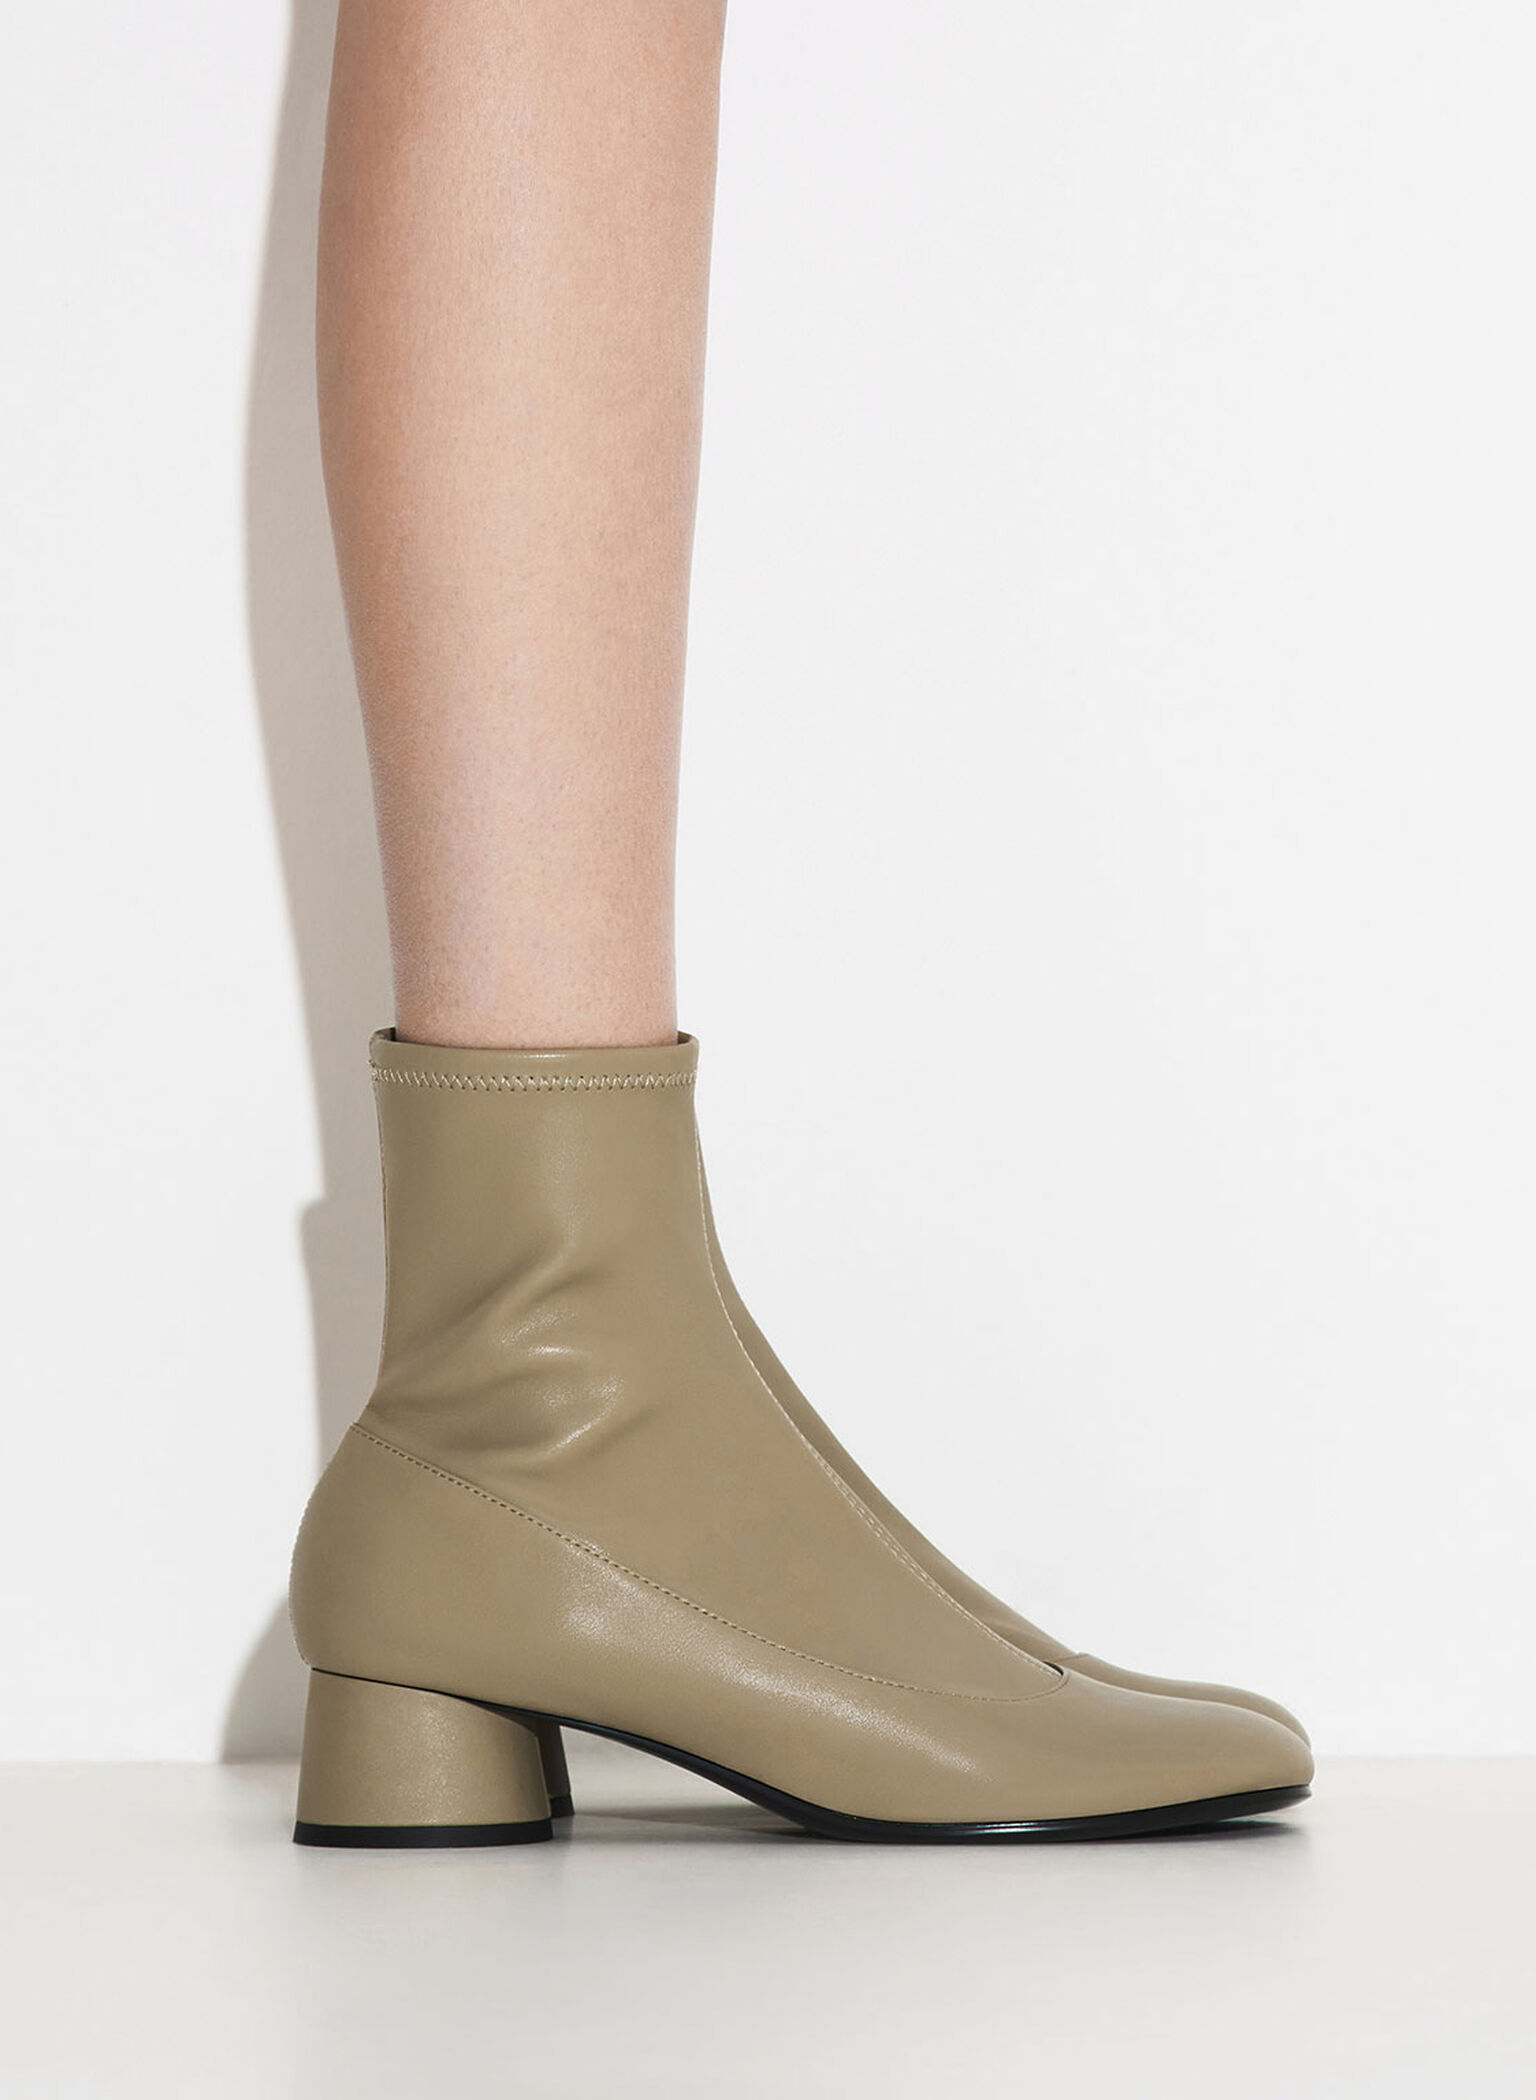 Stitch-Trim Cylindrical Heel Ankle Boots, Olive, hi-res